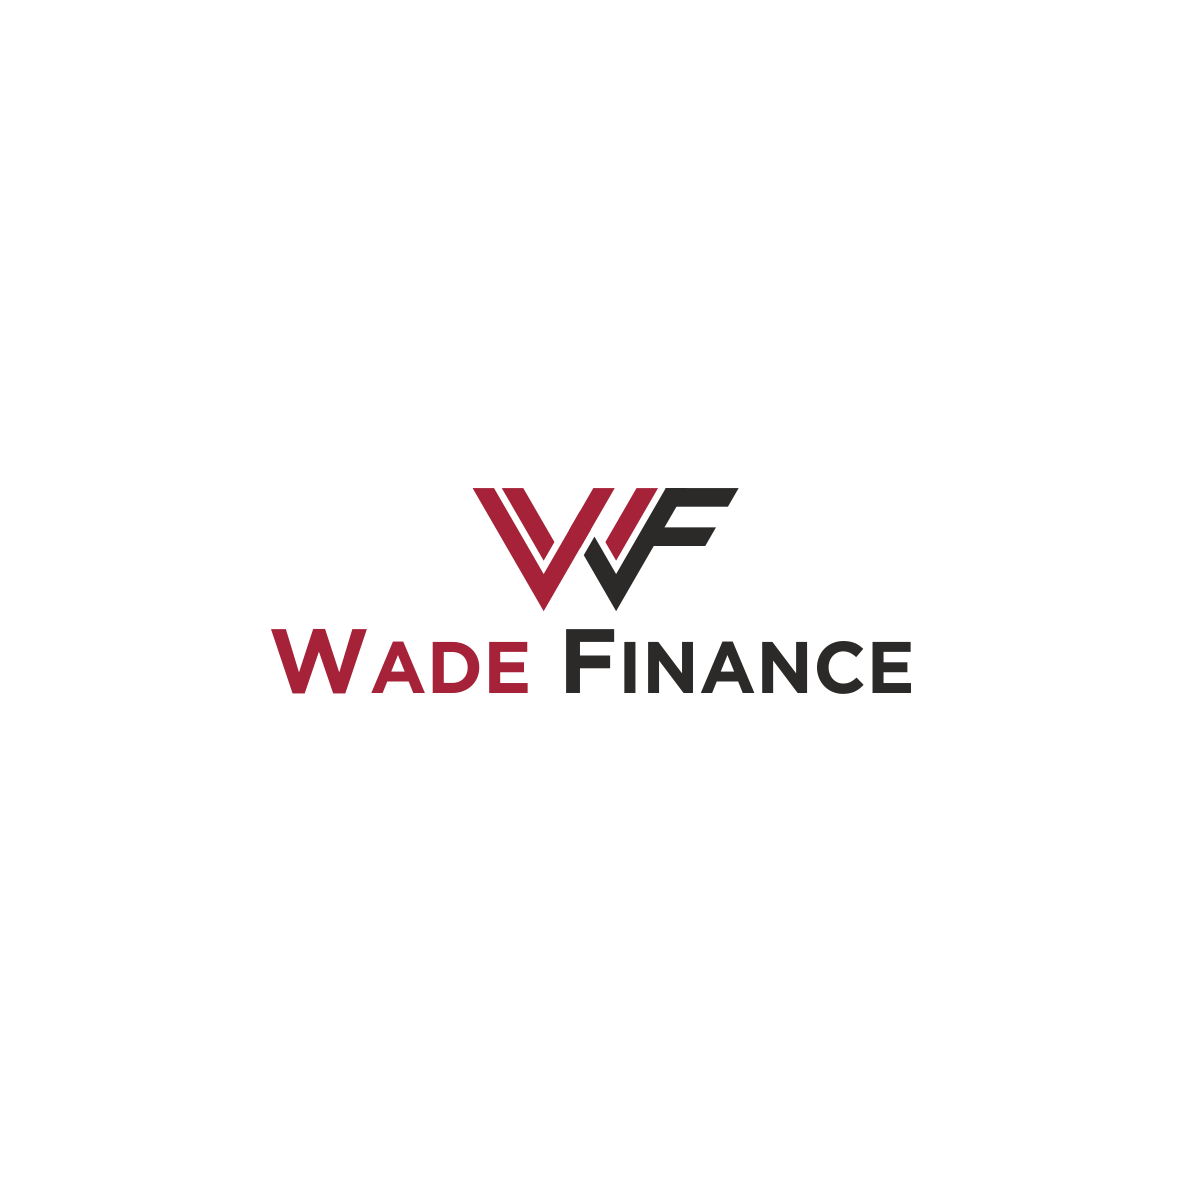 Wade Logo - House Logo Design for Wade Finance Ltd or initials - currenlty use ...